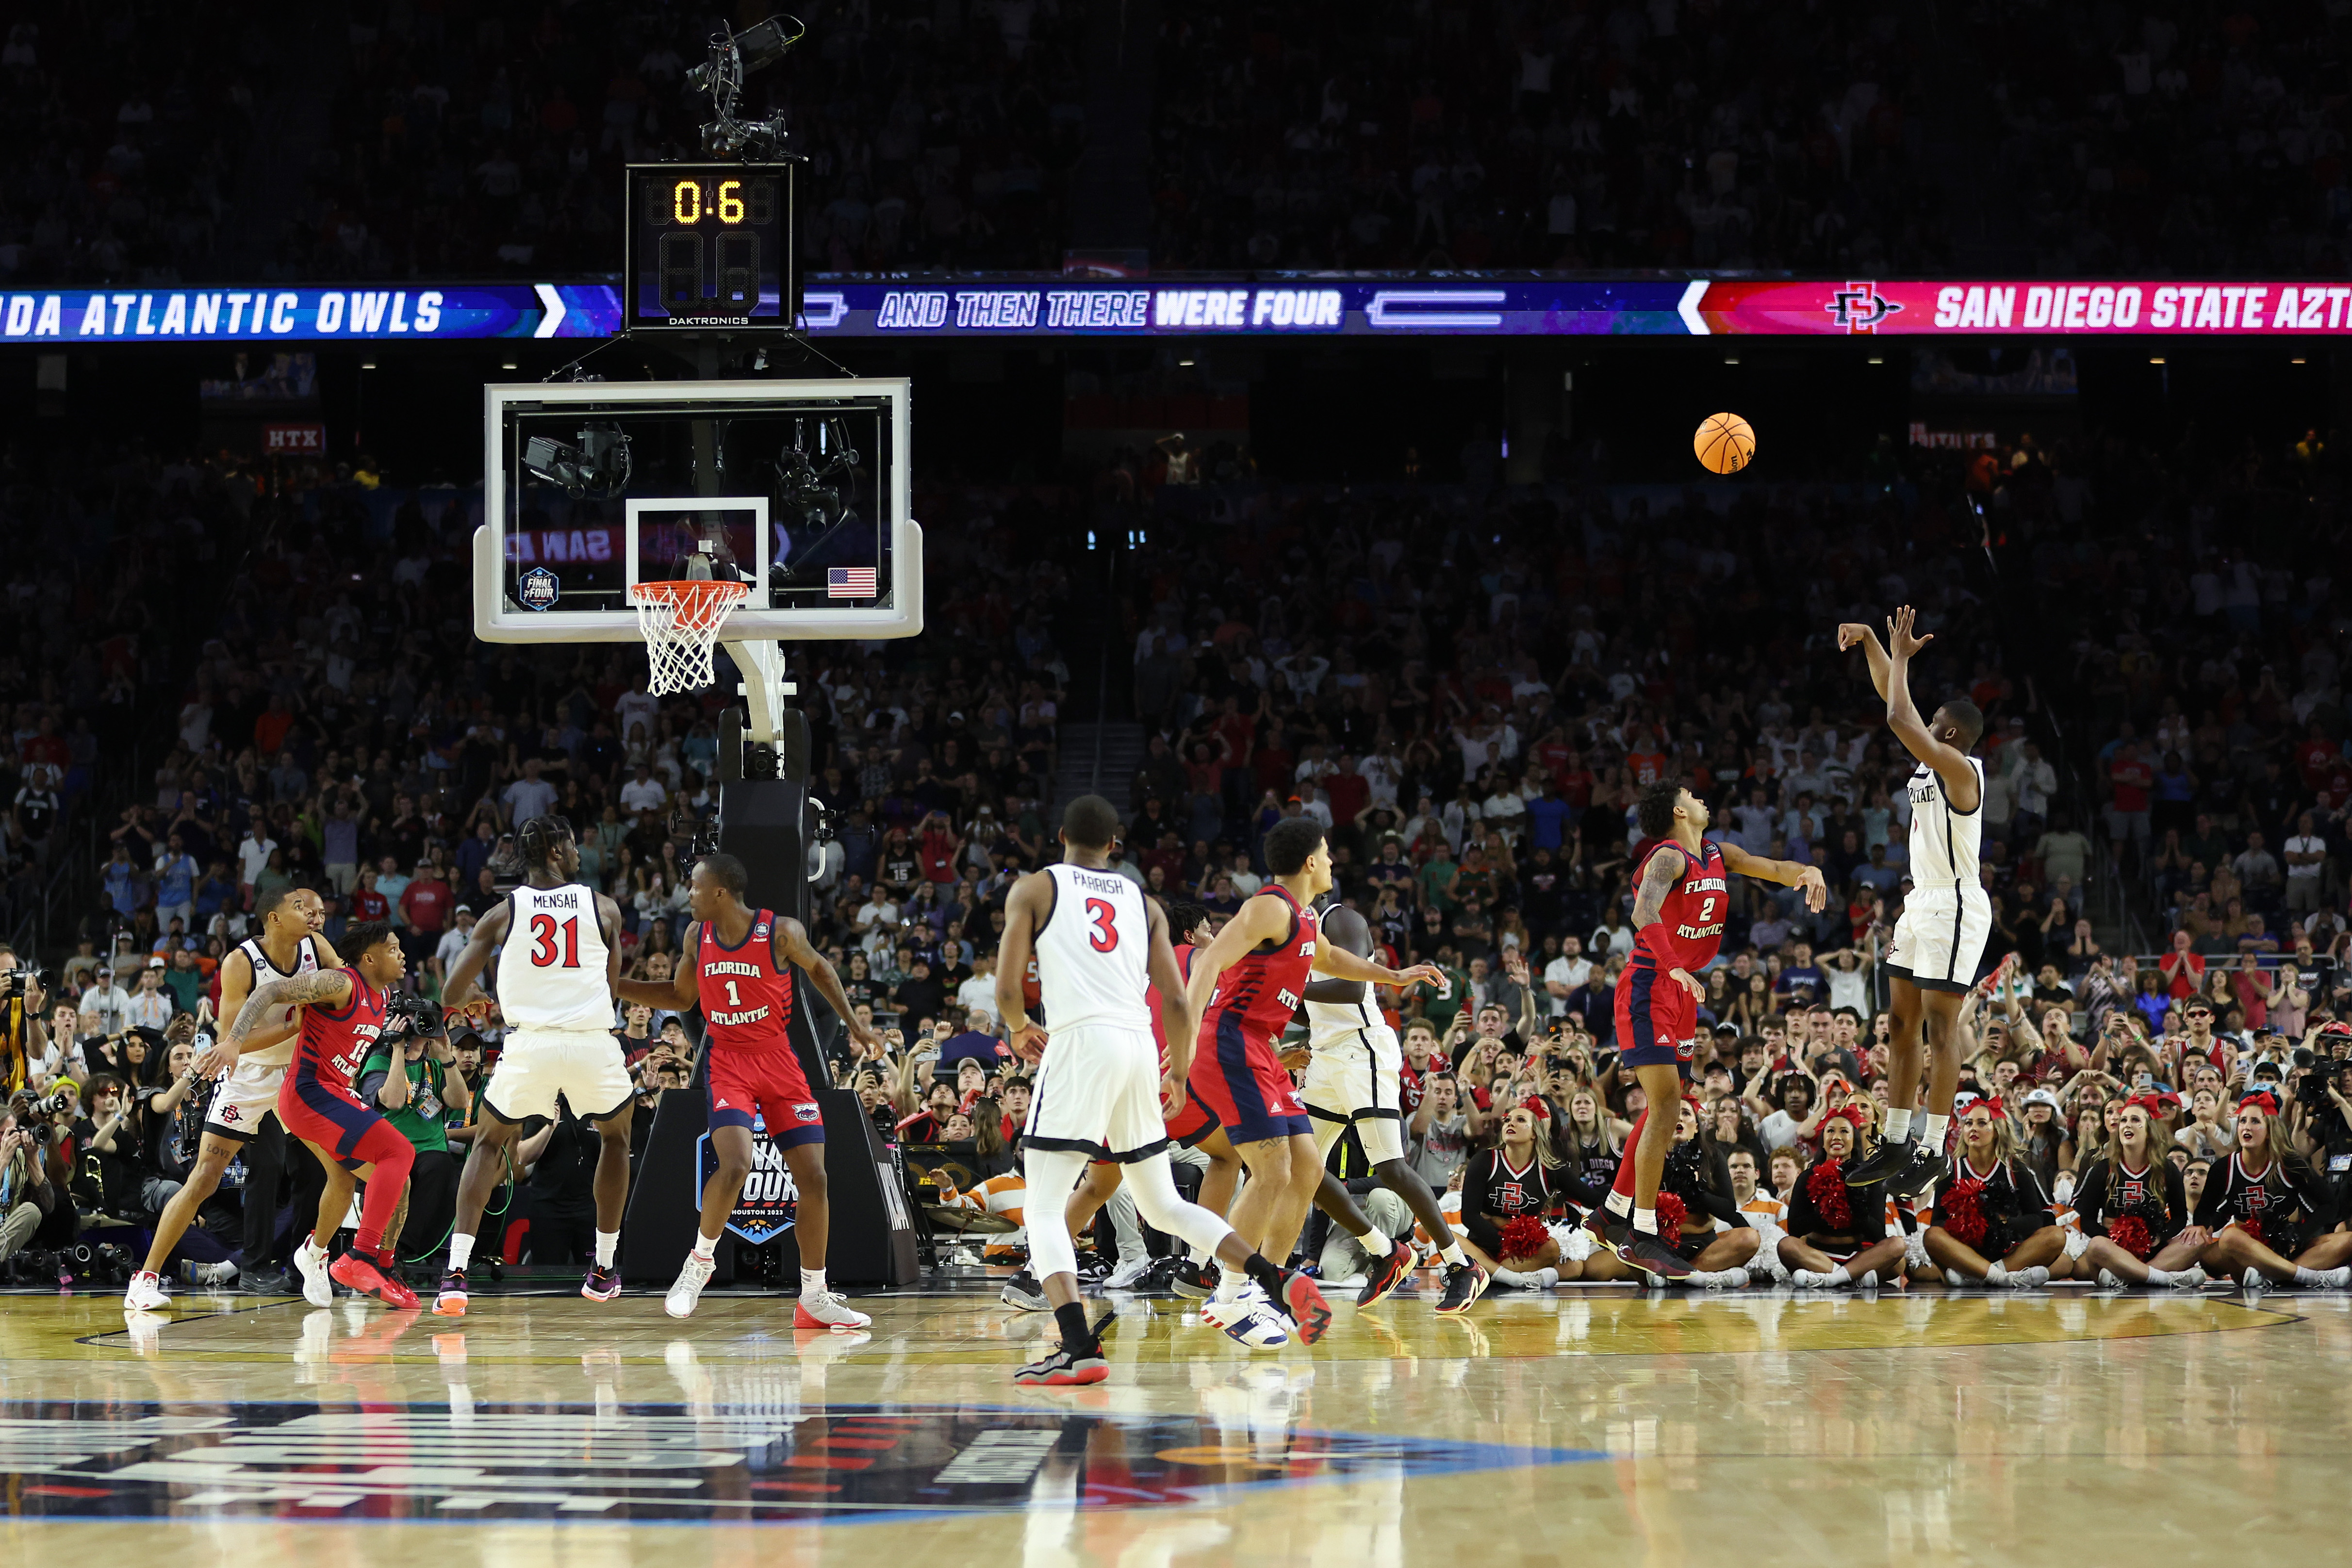 Butler's buzzer-beater sends San Diego State to title game